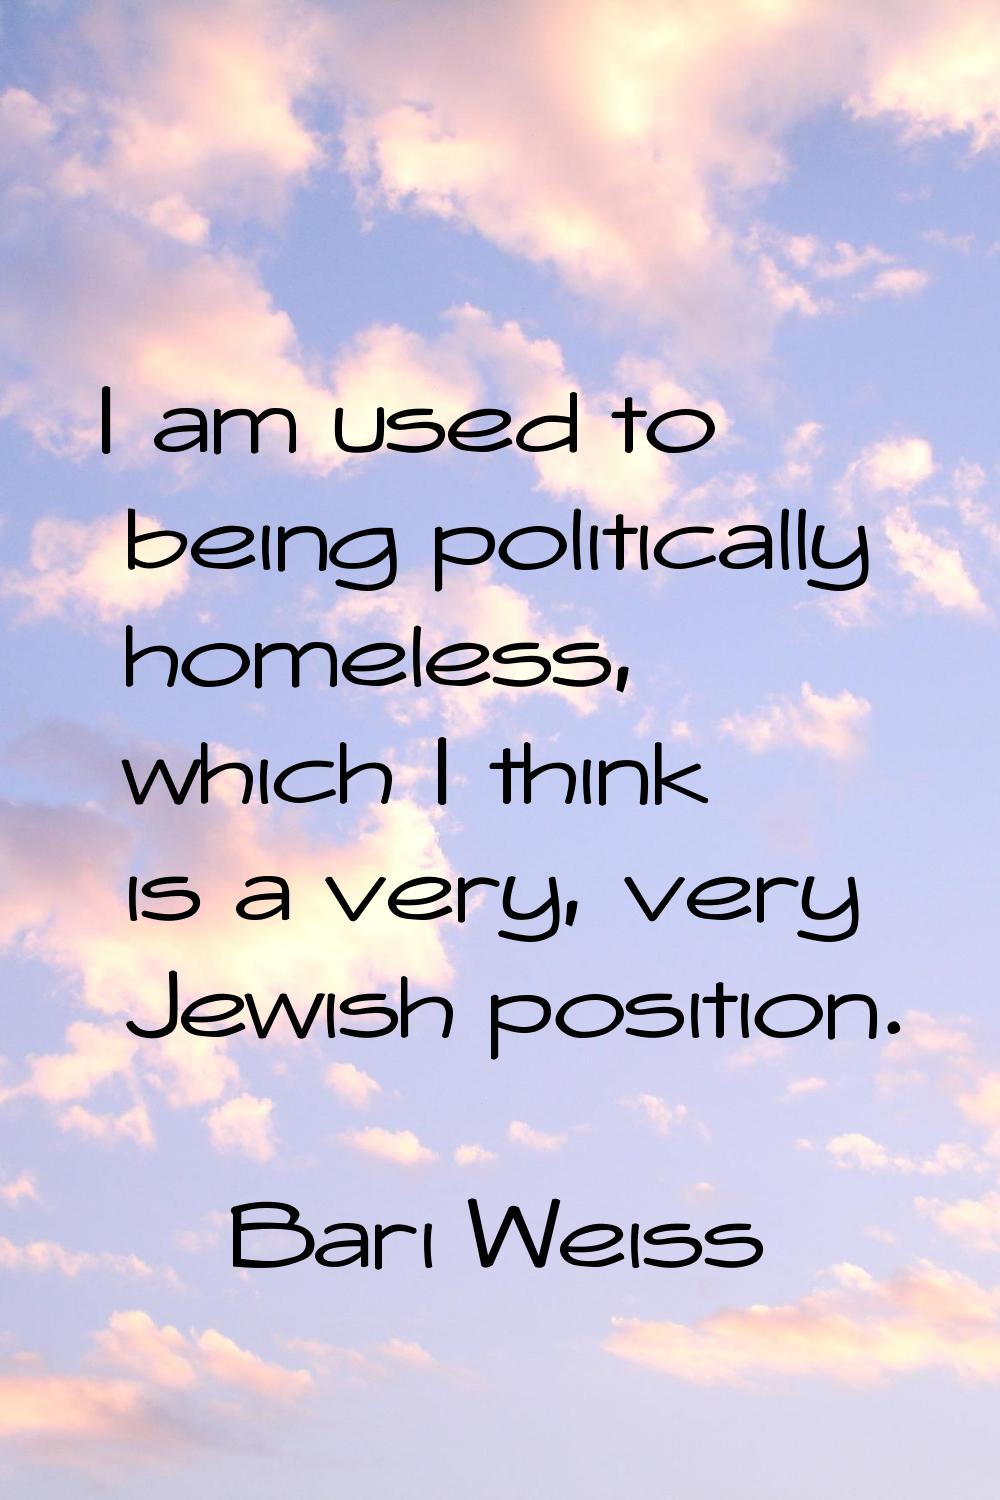 I am used to being politically homeless, which I think is a very, very Jewish position.